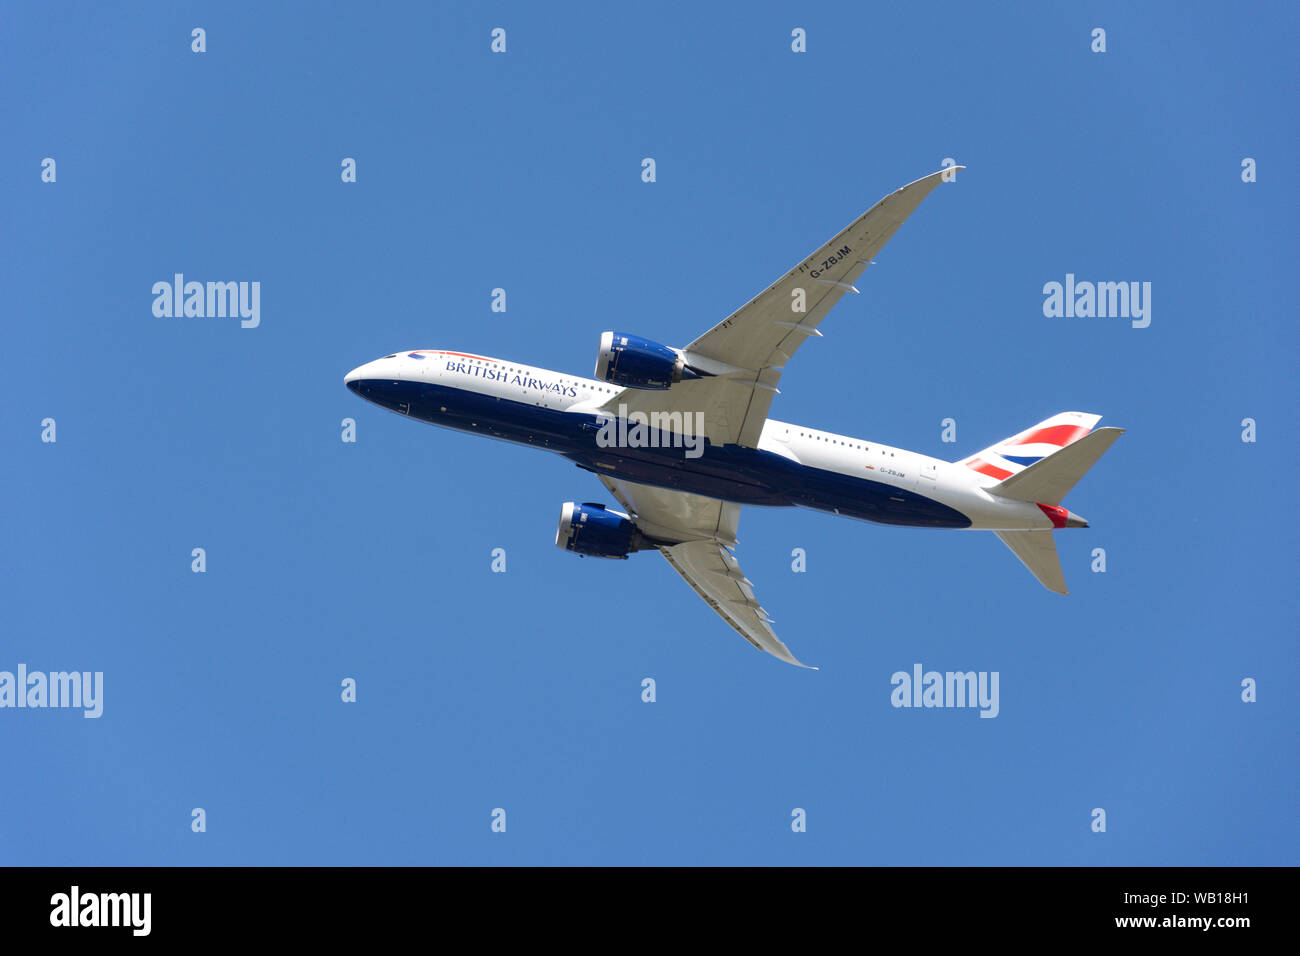 British Airways Boeing 787 Dreamliner taking off from Heathrow Airport, Hounslow, Greater London, England, United Kingdom Stock Photo